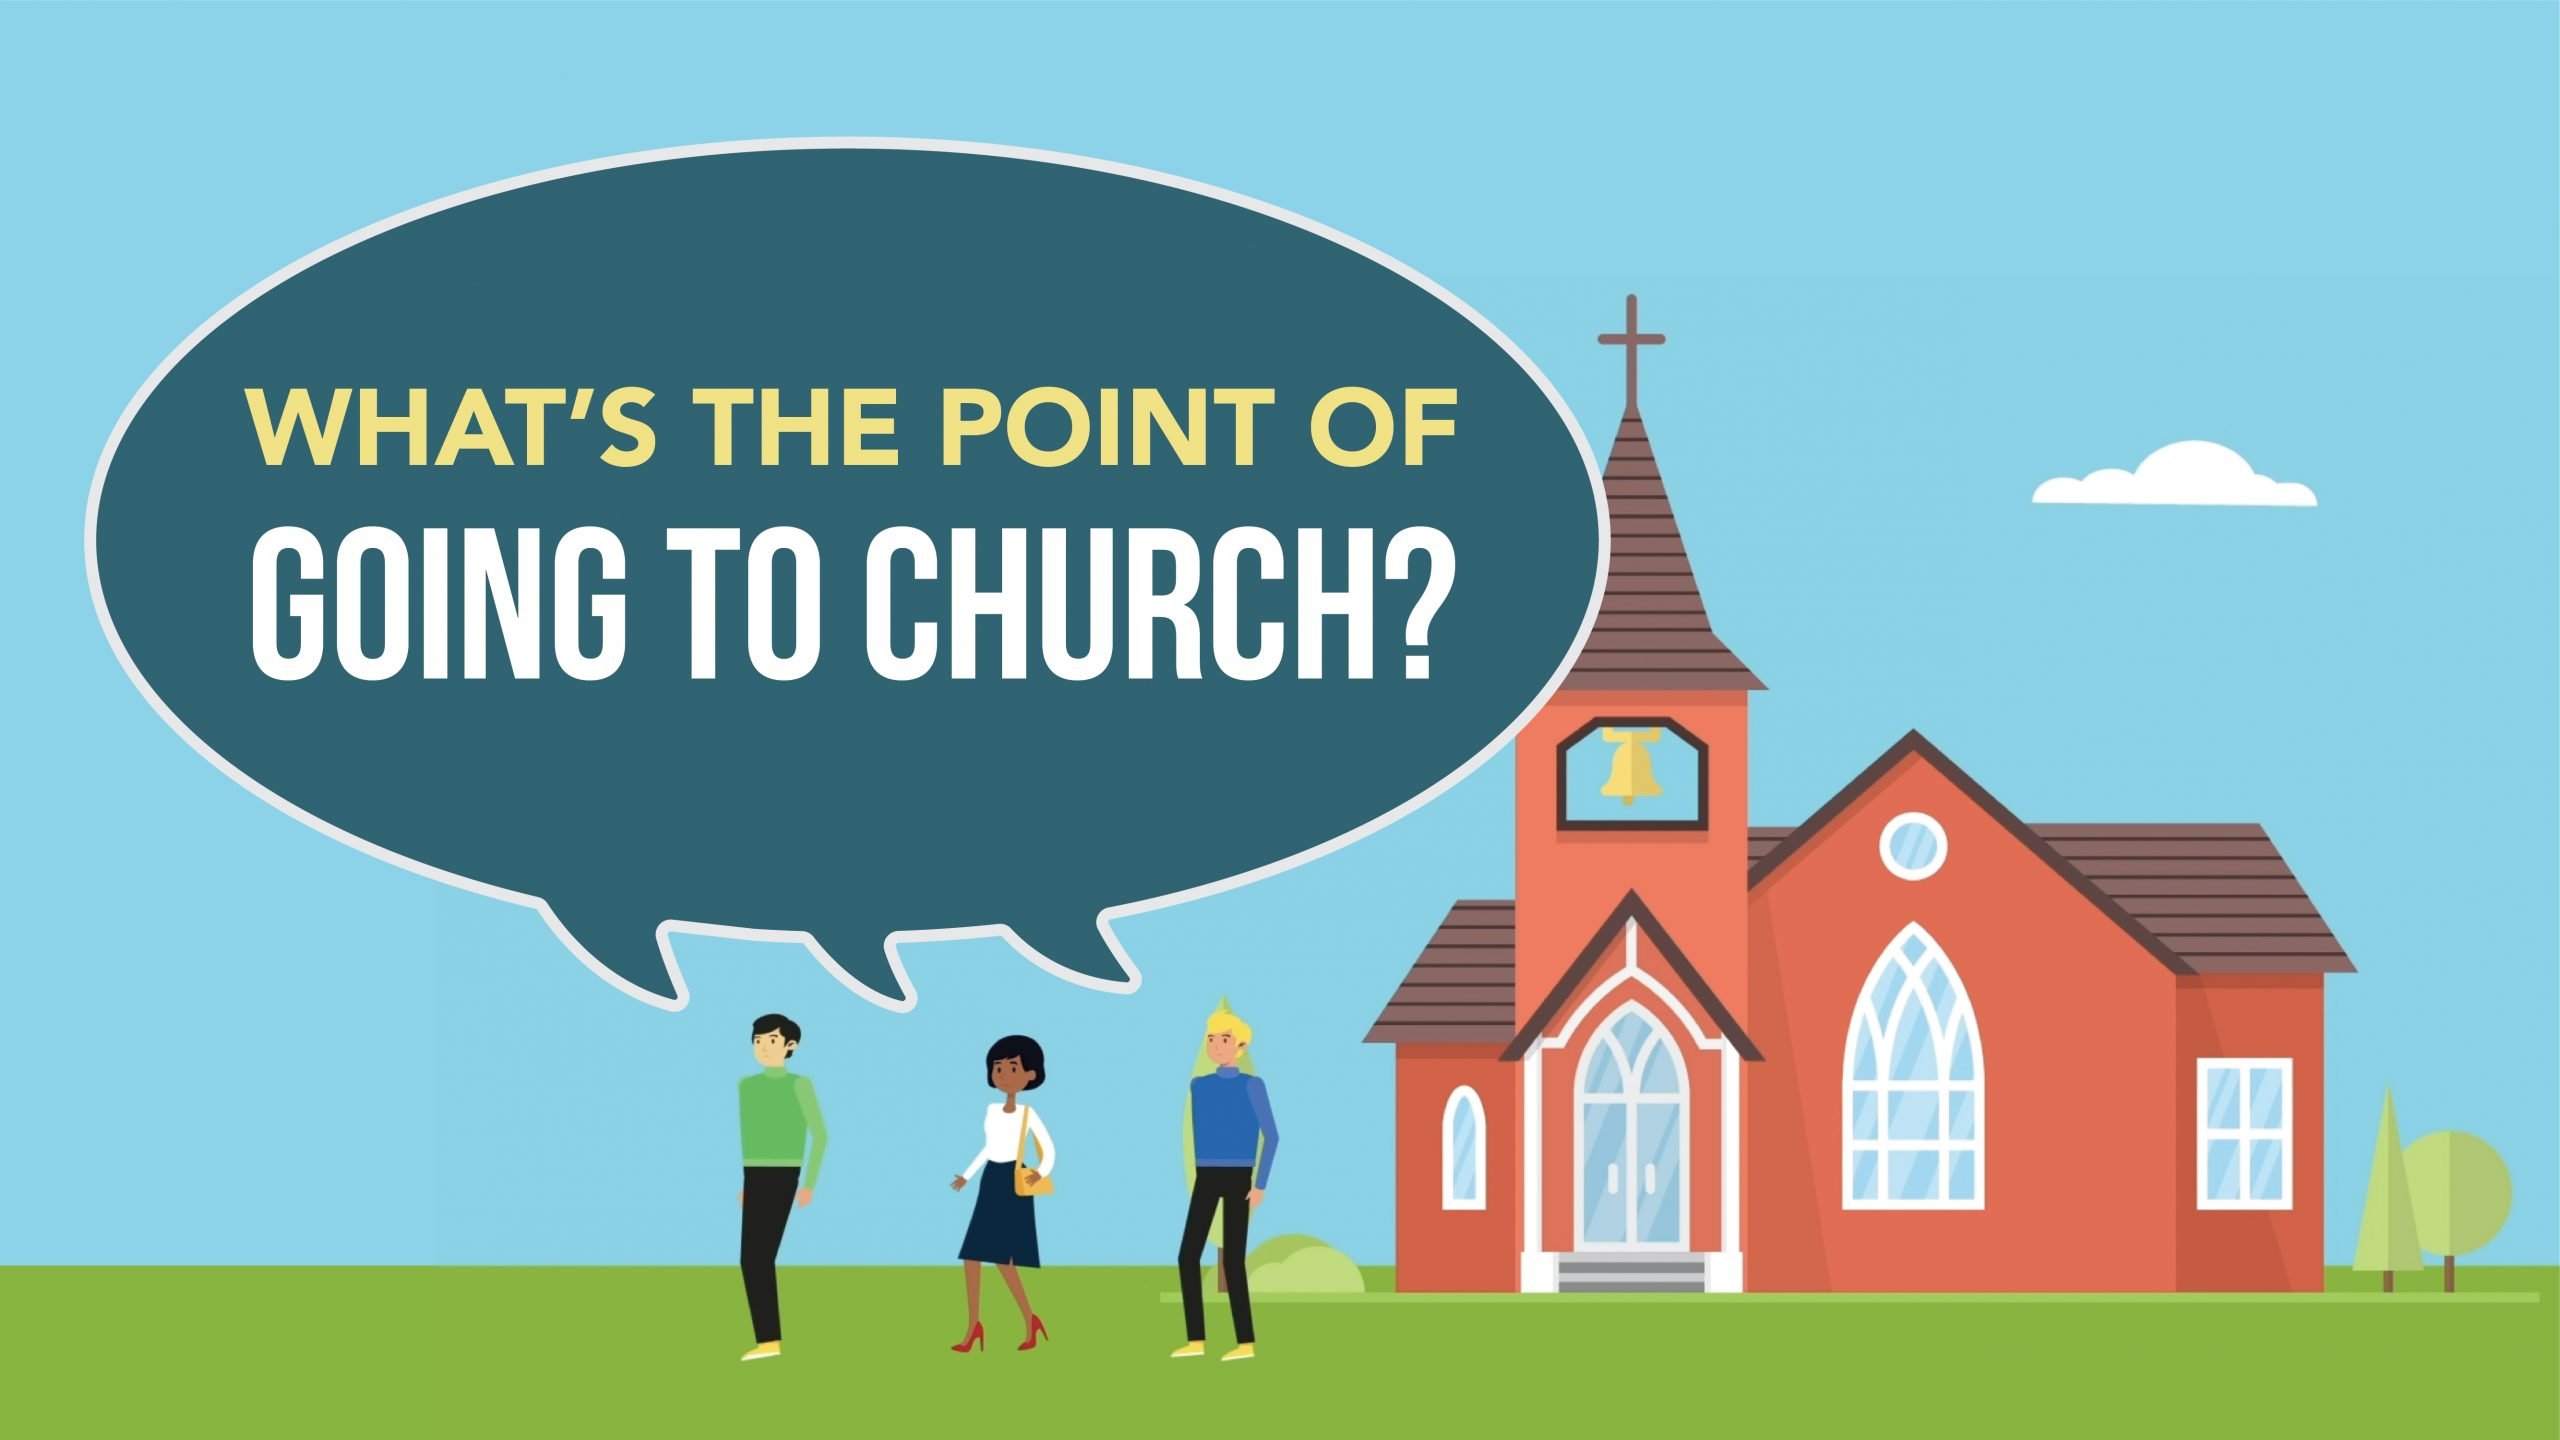 What’s the Point of Going to Church?